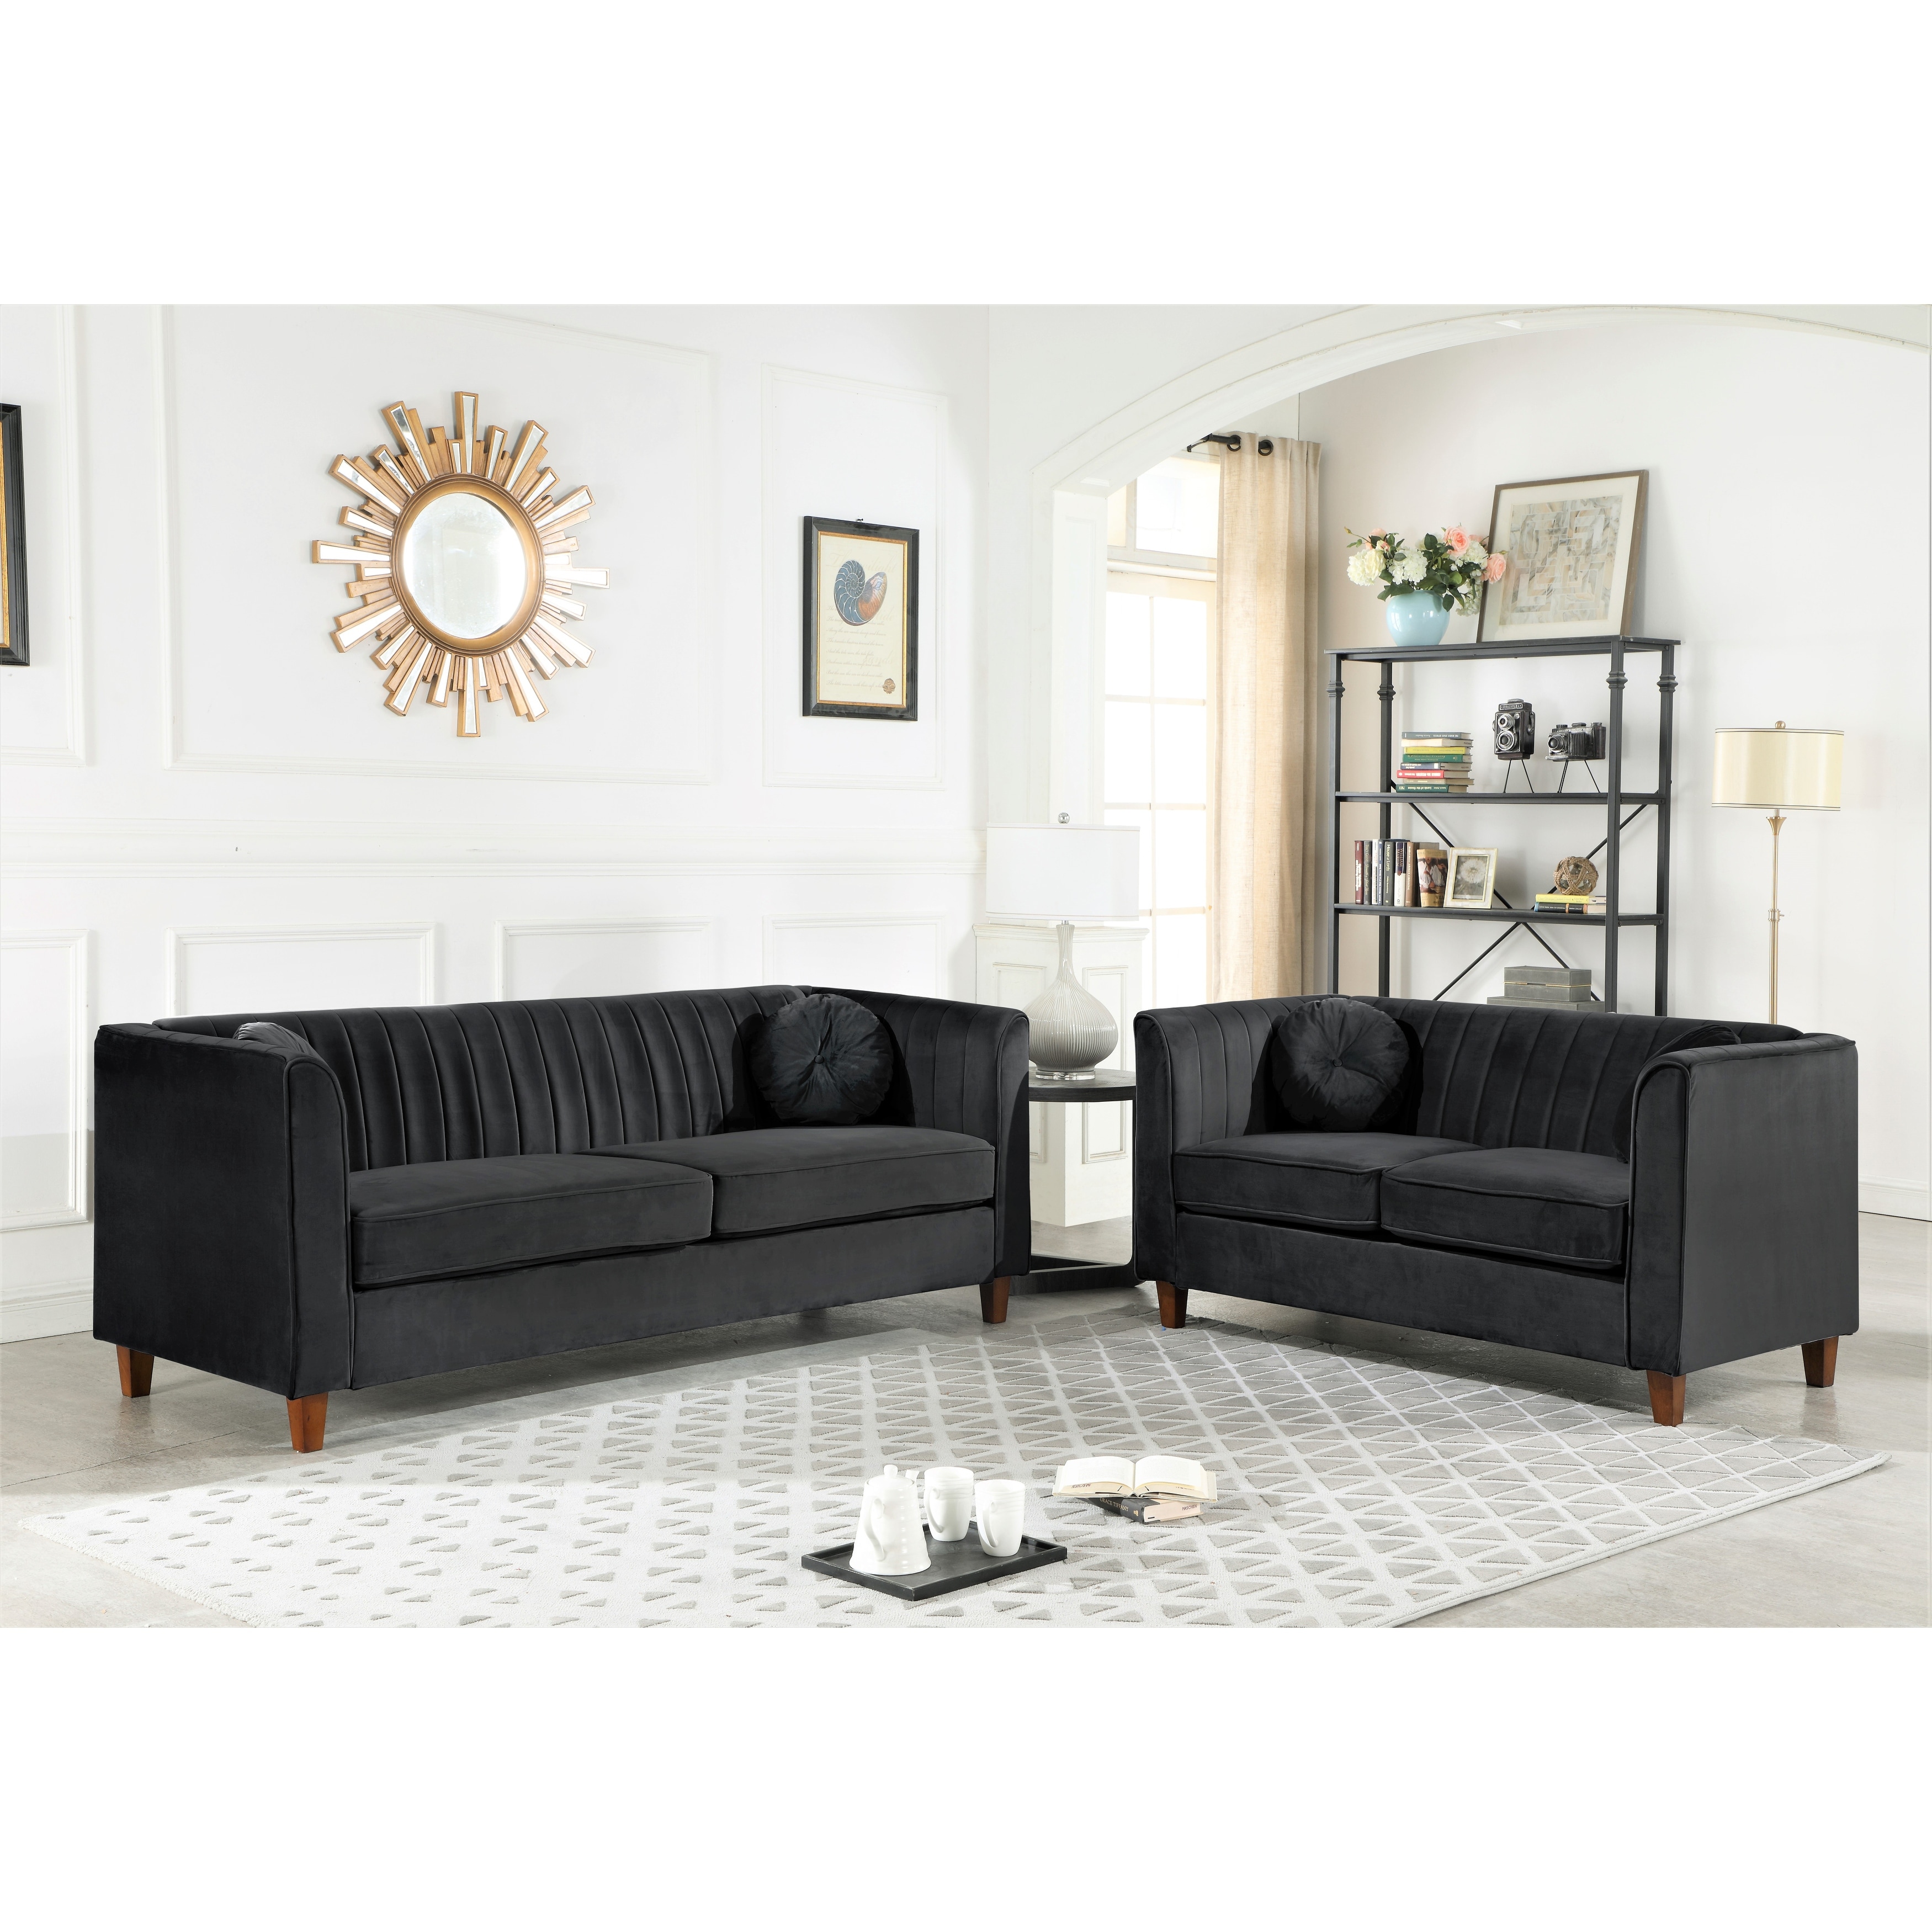 BLACK Container Furniture Direct Kitts Upholstered Chesterfield Sofa and Loveseat Set